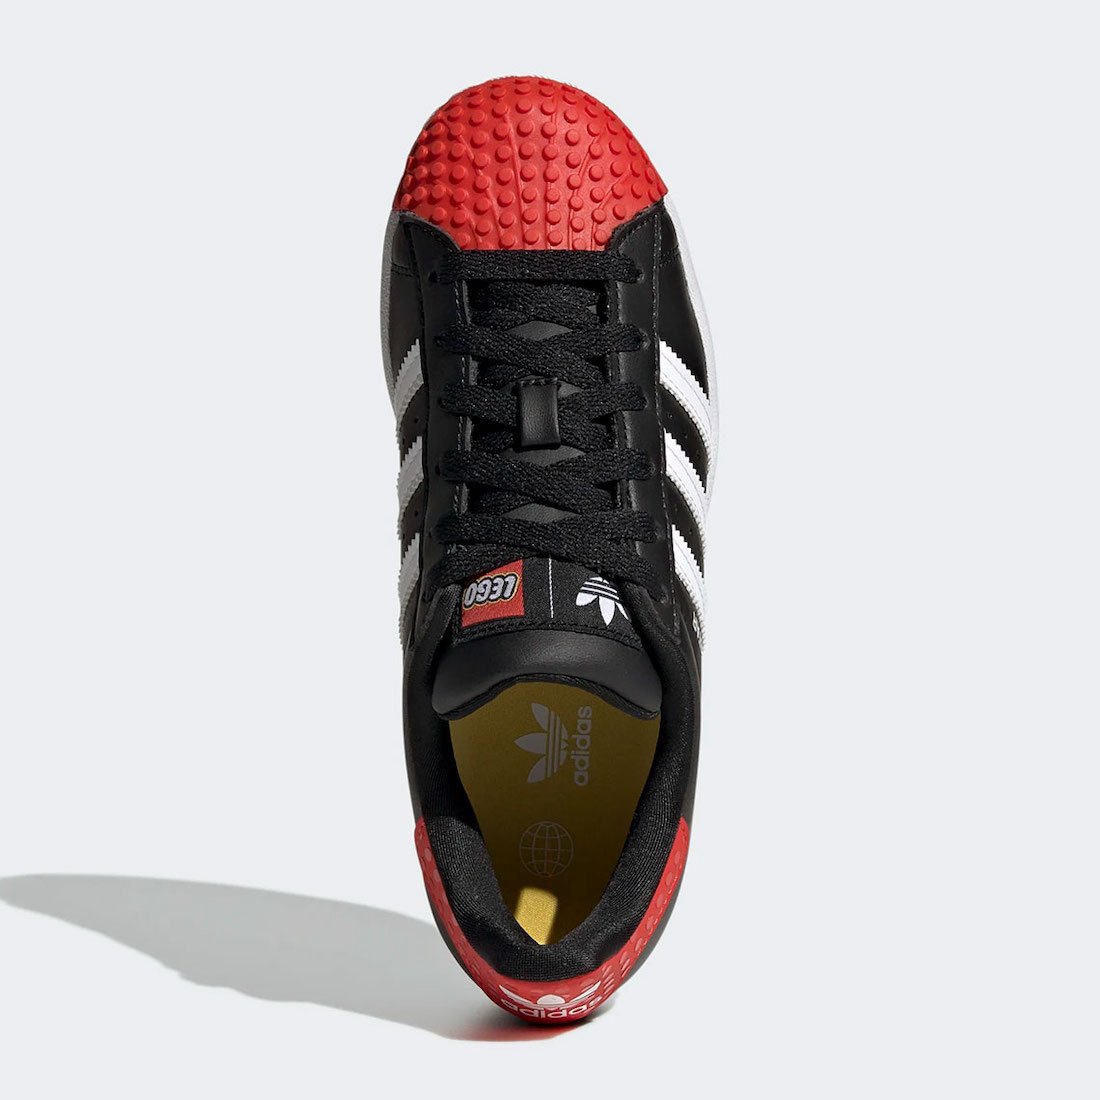 LEGO adidas Superstar Red GX3382 Release Date Info